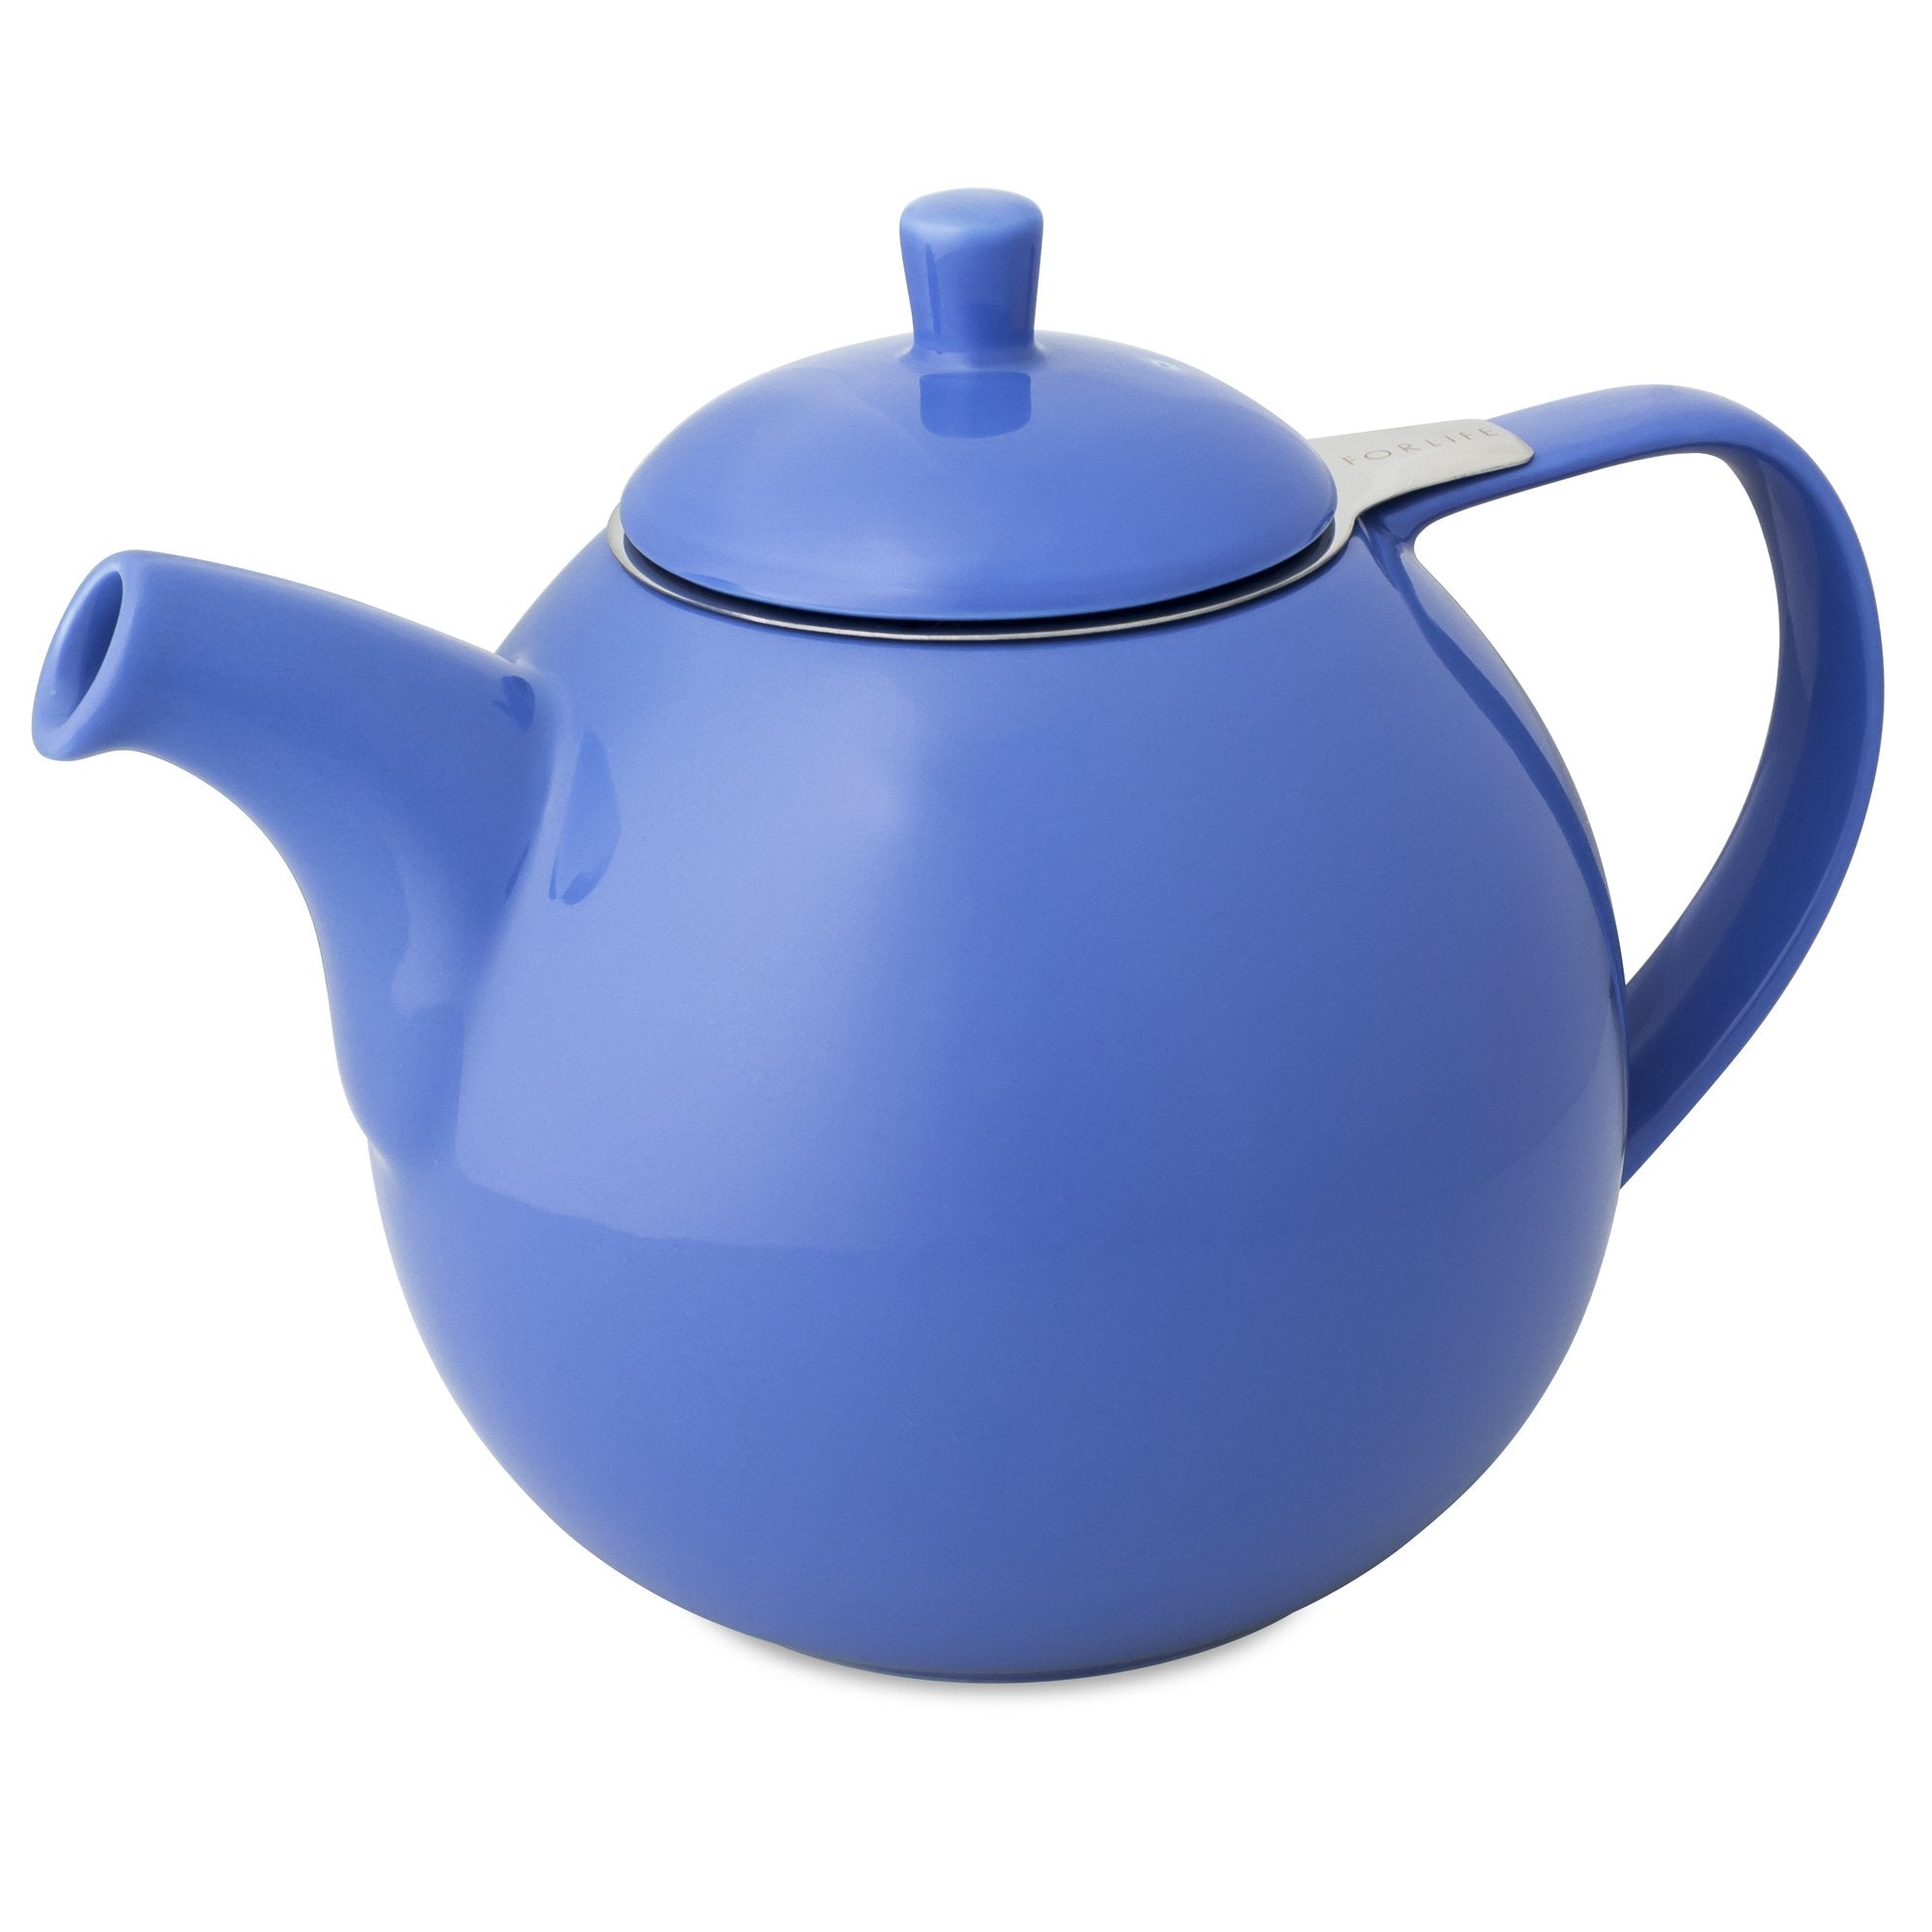 TeaLula 45 oz Curve blue Teapot glossy surface with lid